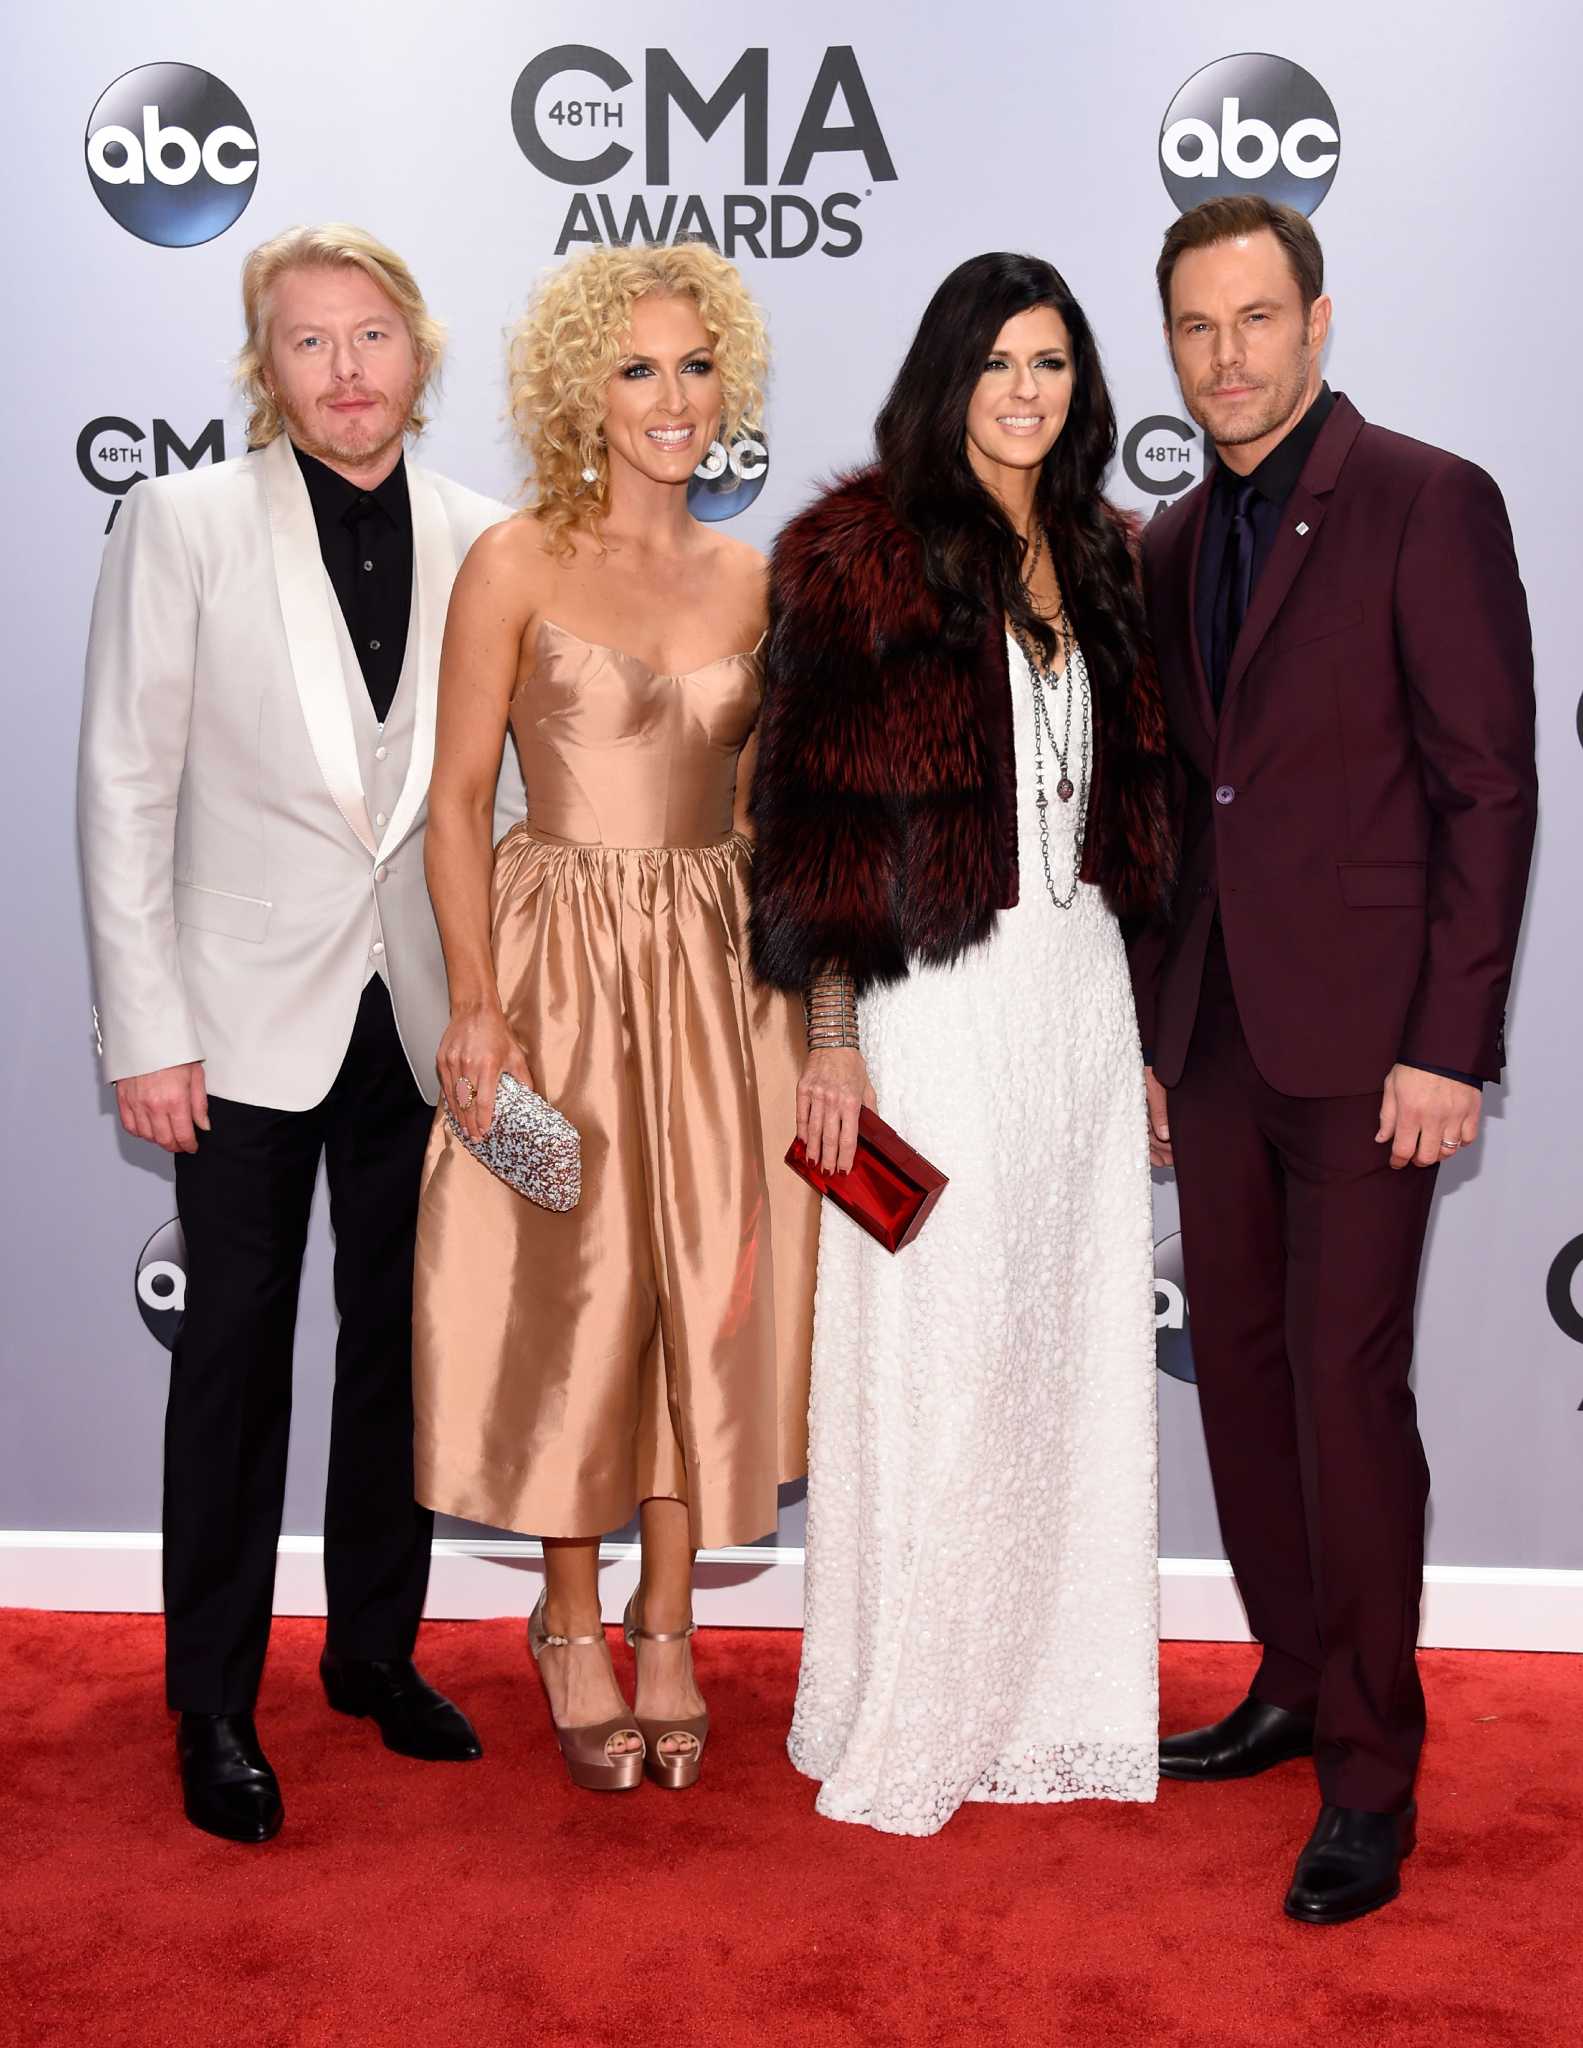 Best and worst dressed at the CMA Awards